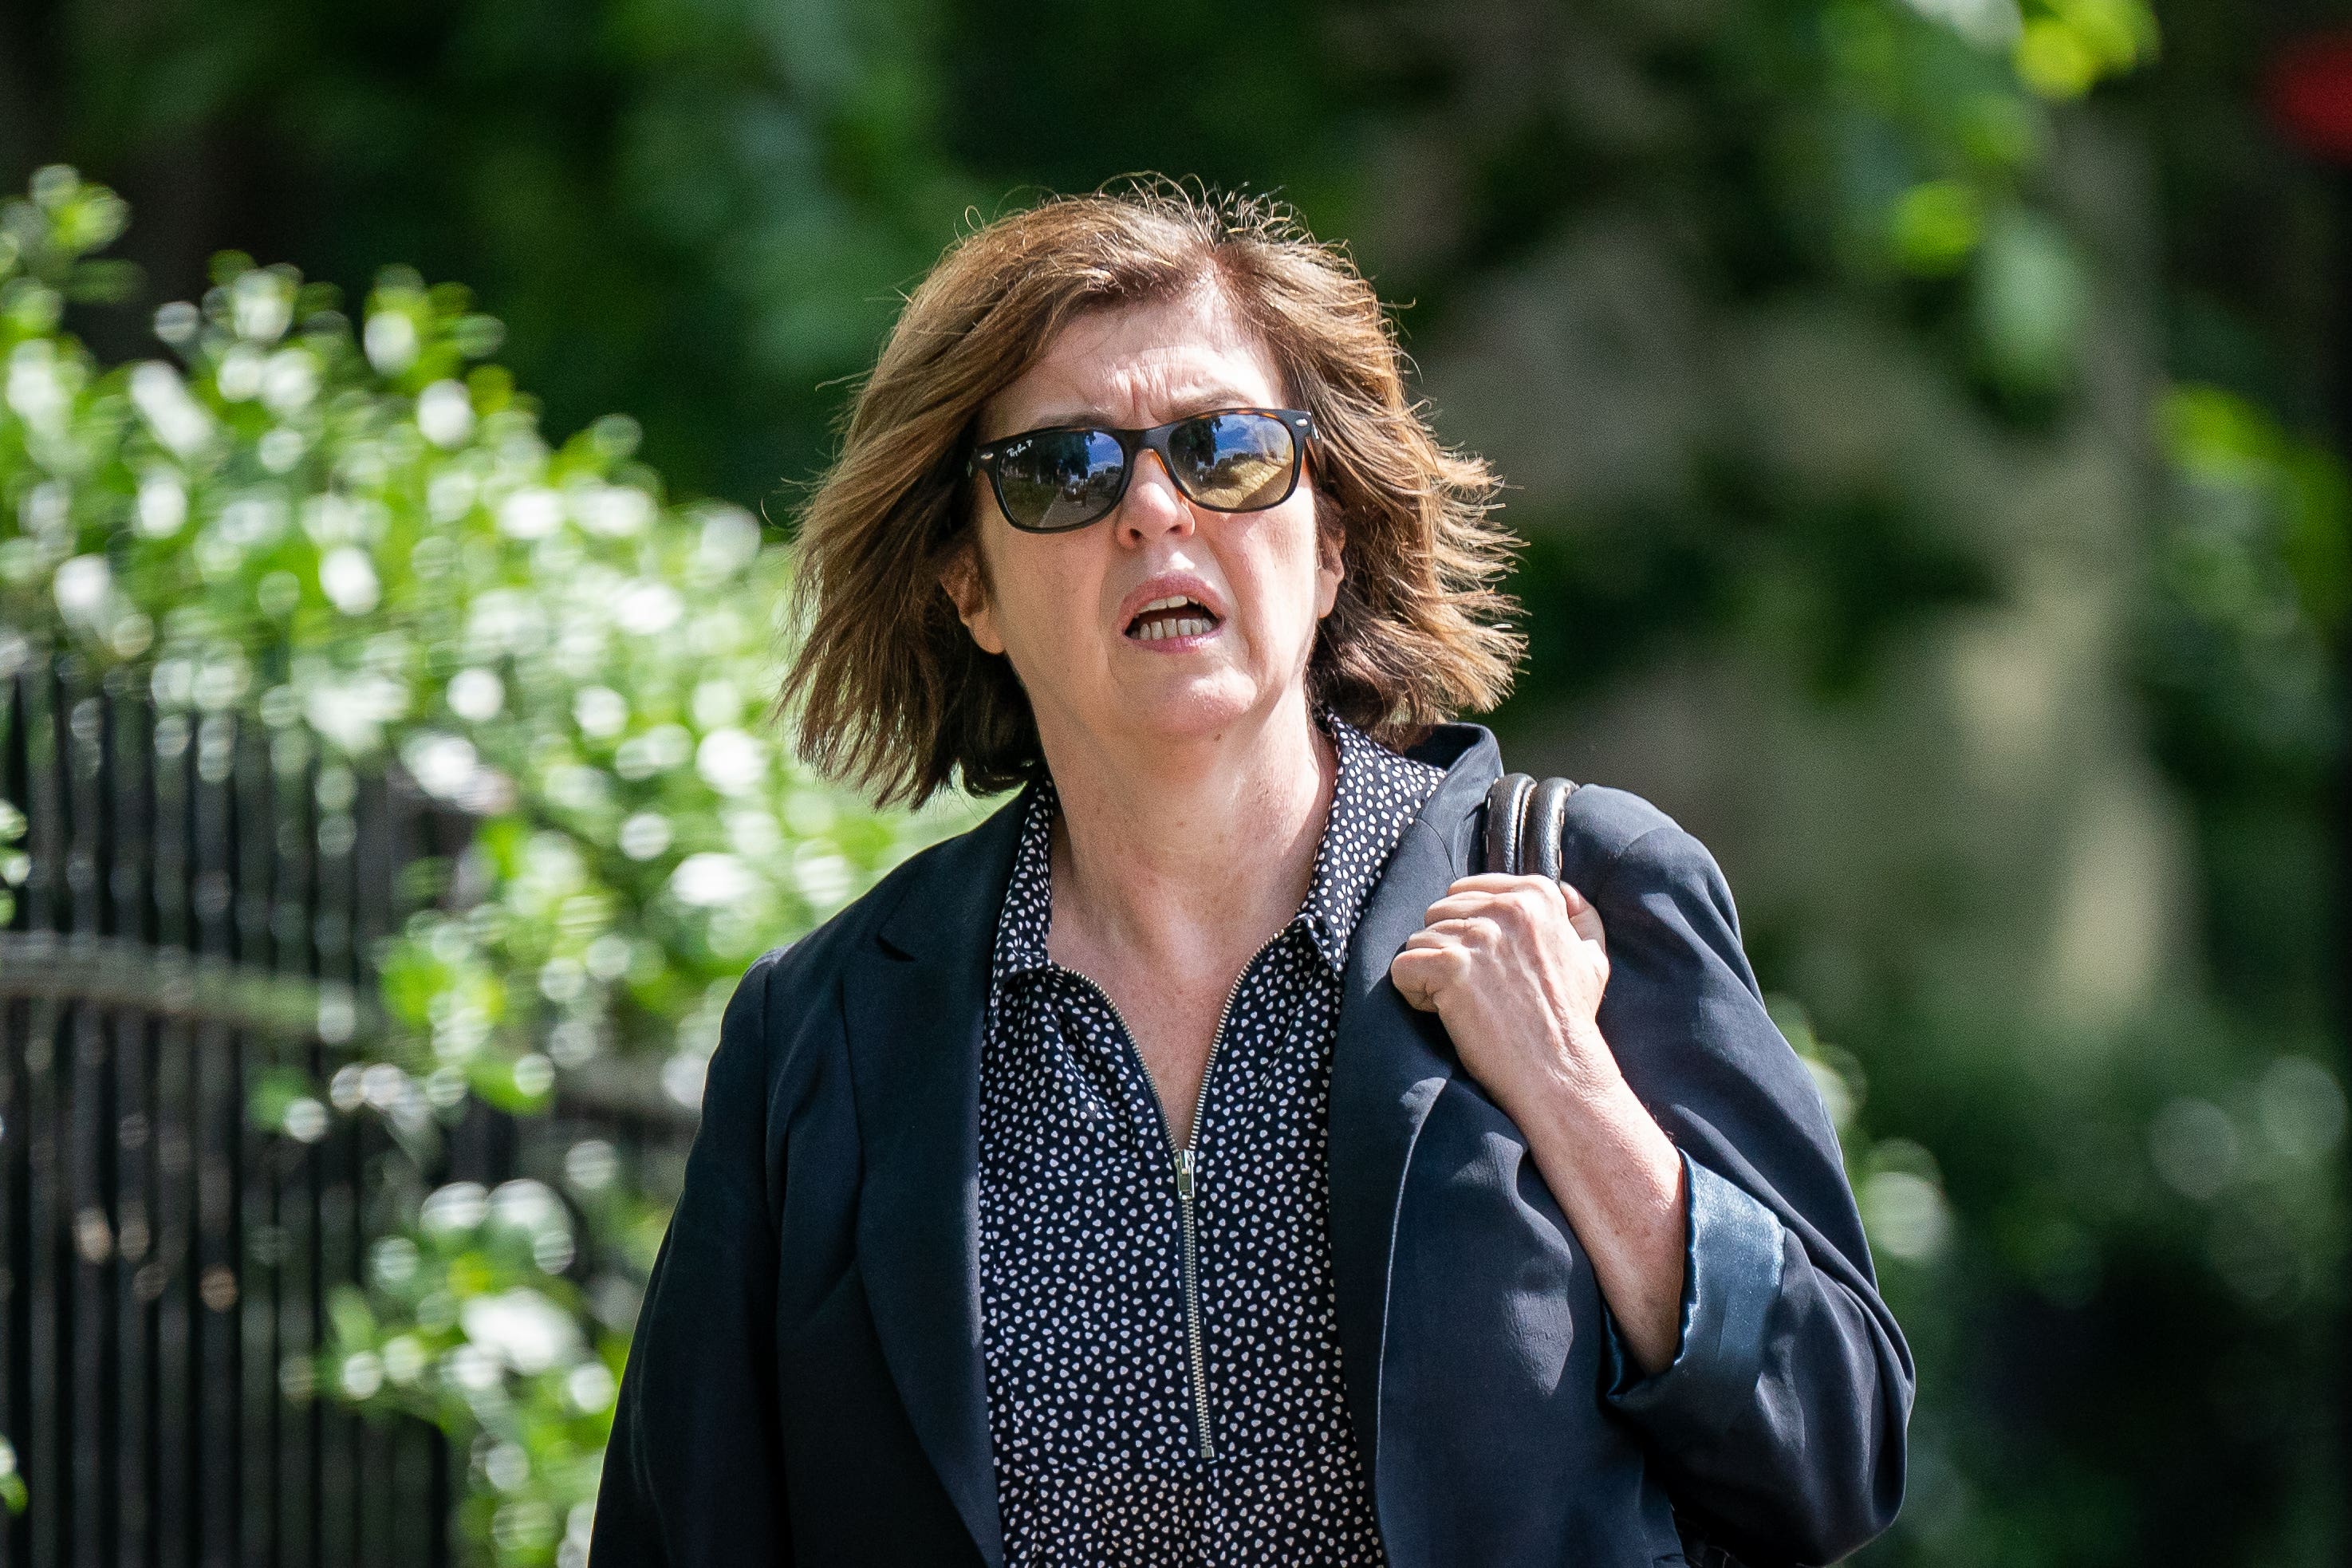 Last month, Sue Gray, the Whitehall mandarin who wrote the Partygate report on drinks parties in No 10, started work as Starmer’s chief of staff.